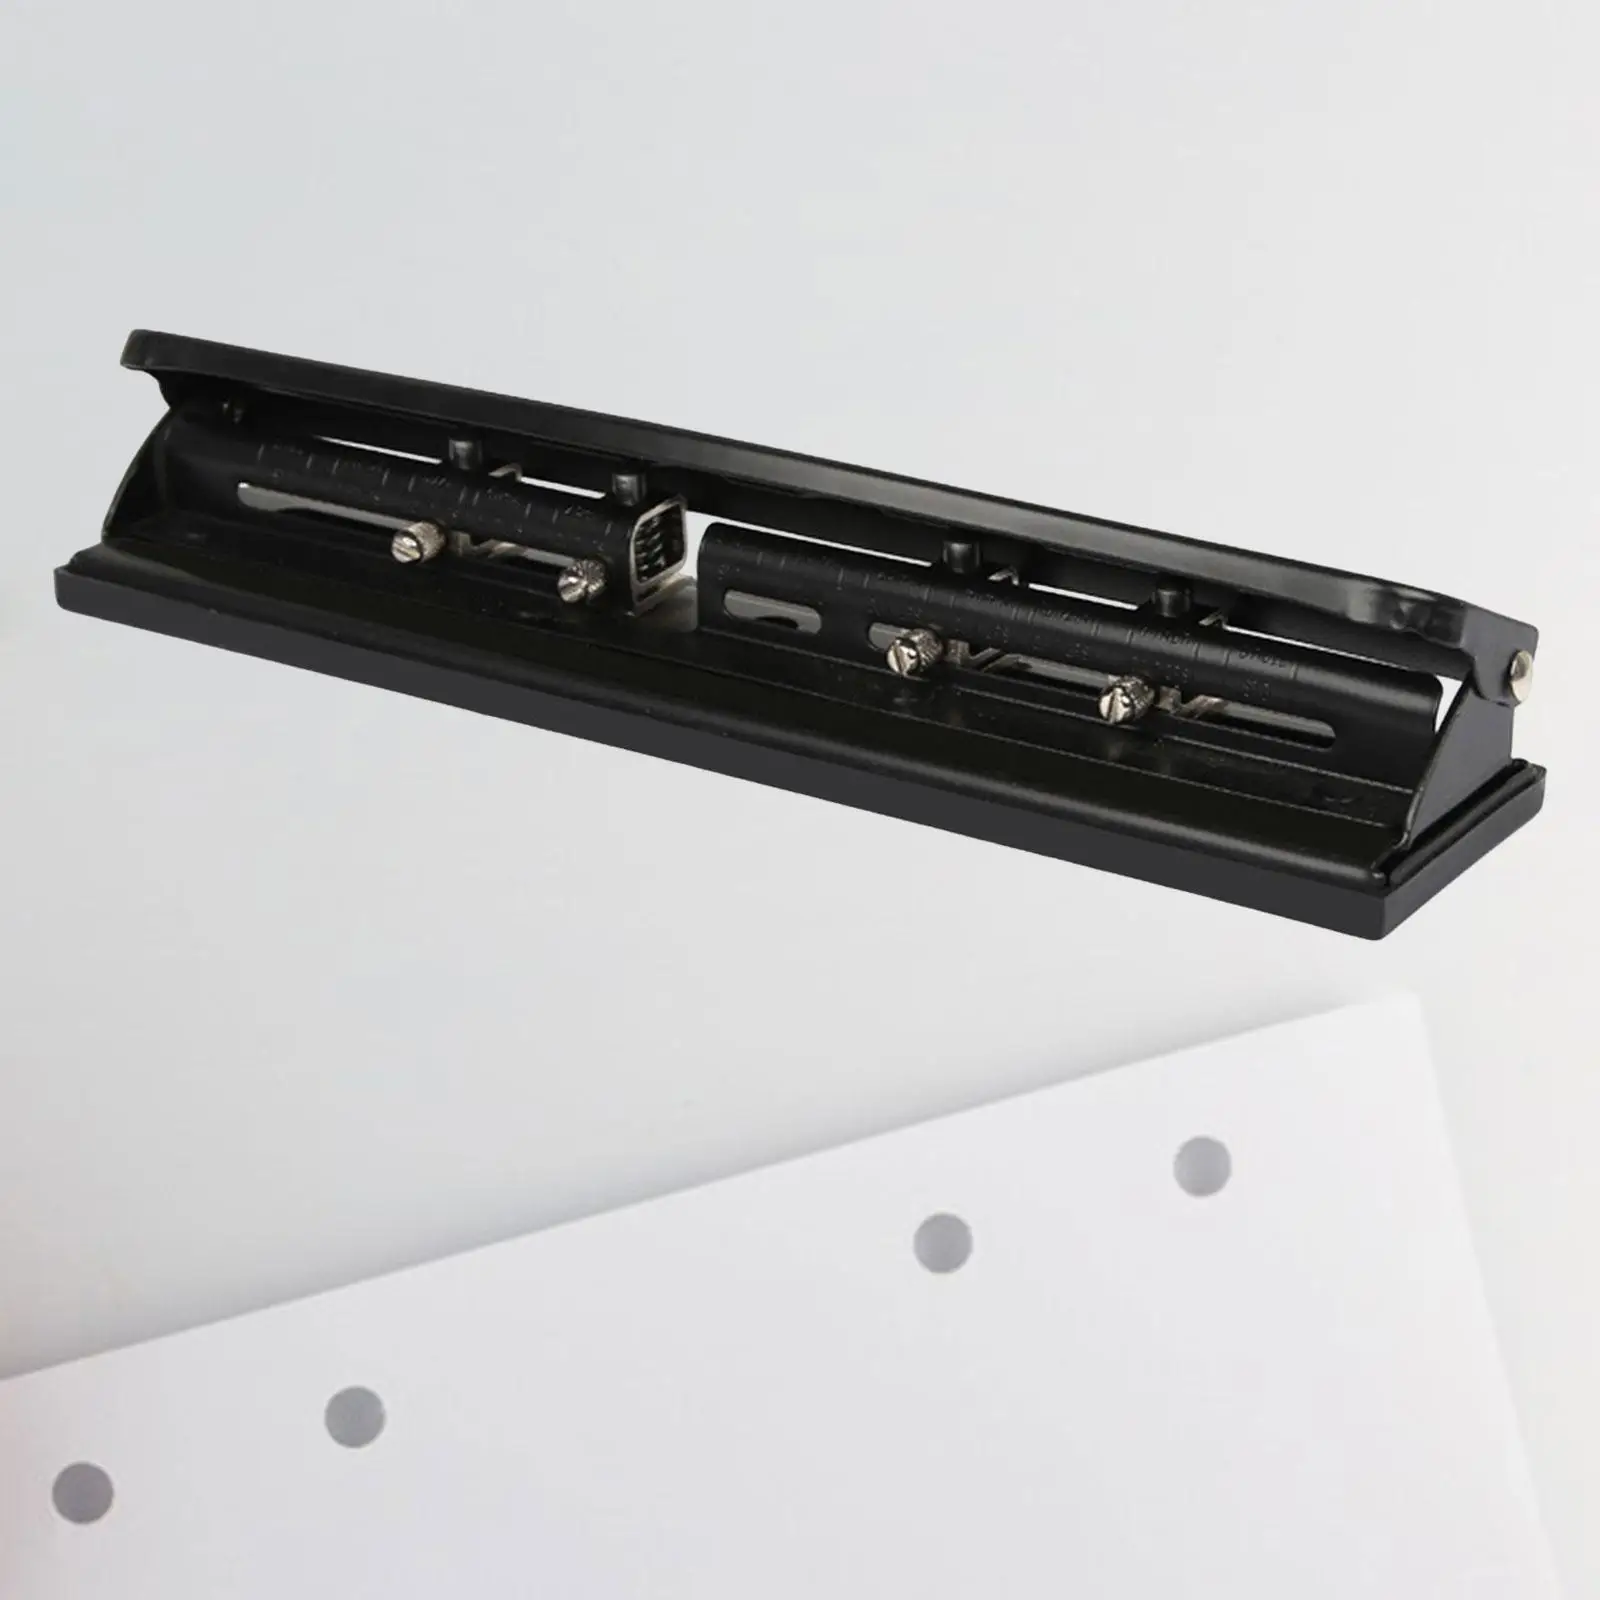 4 Hole Punch Desktop Manual File Binding Portable Metal Heavy Duty Paper Punching Machine for Classroom Home Office